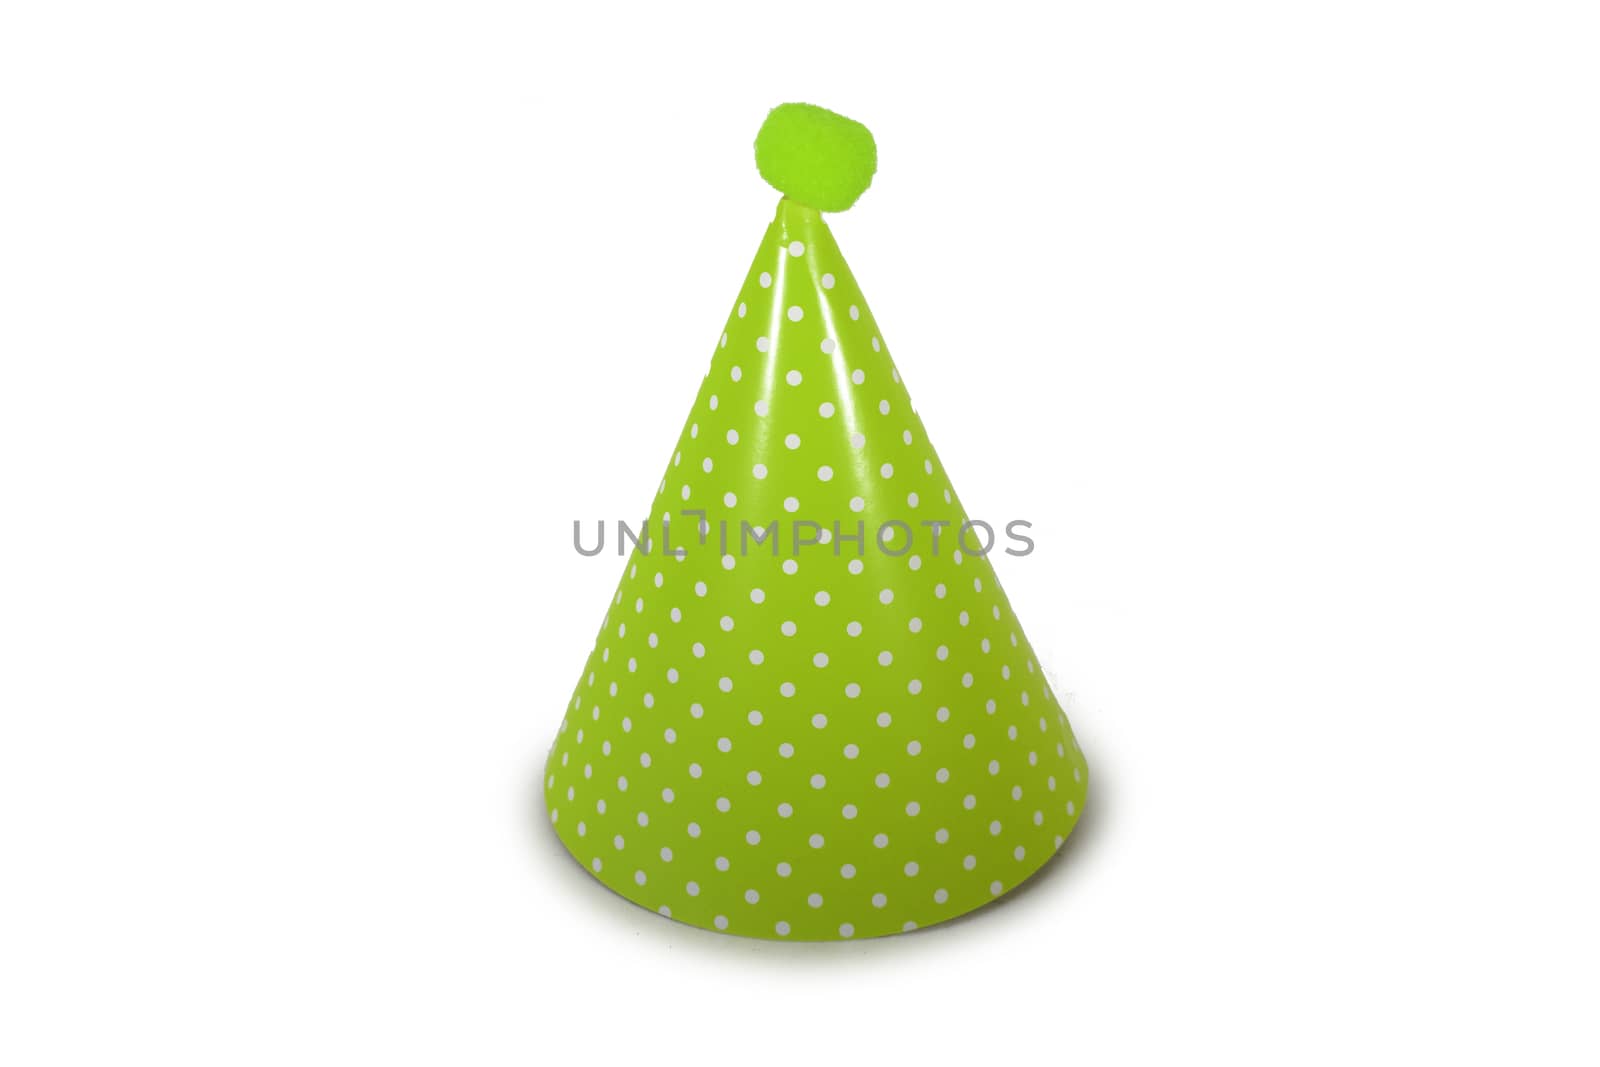 A Green Birthday Hat on a Pure White Background by bju12290